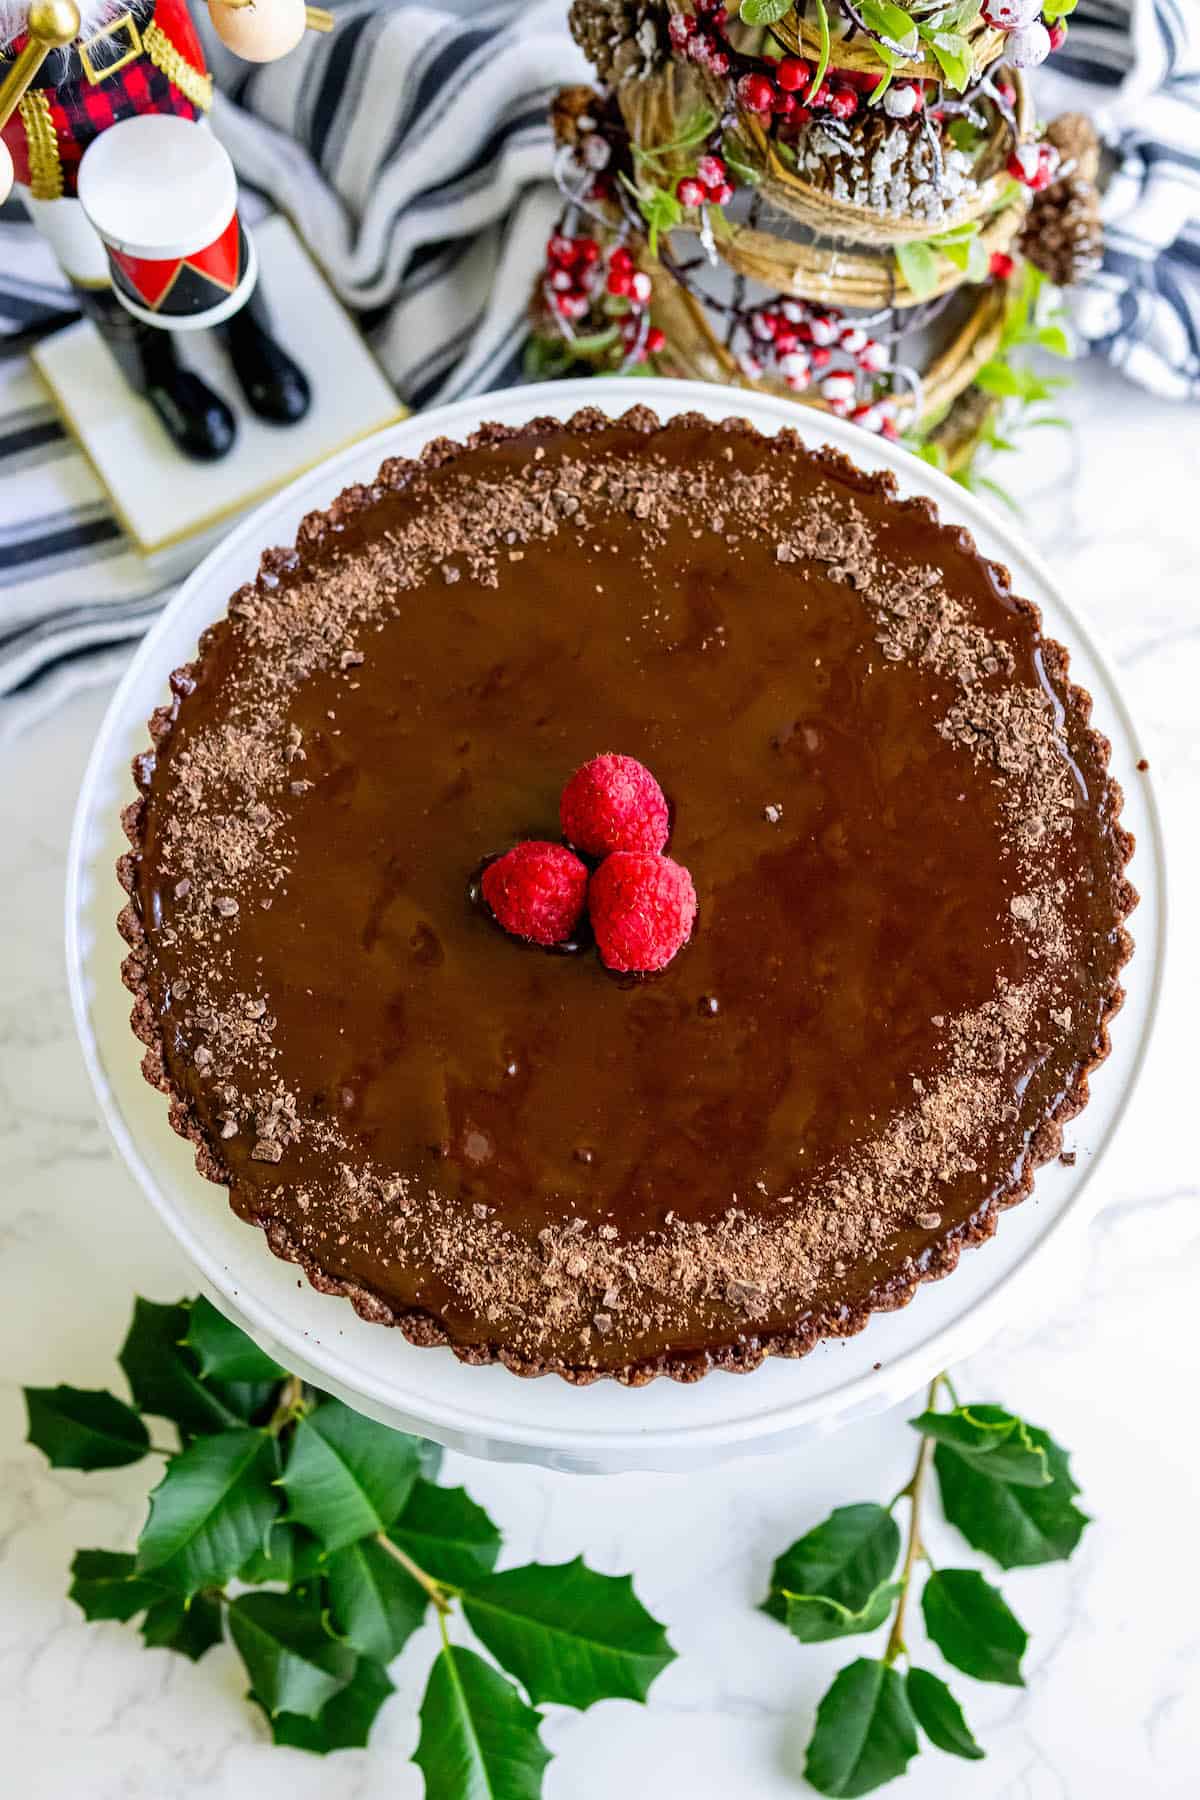 A silky chocolate tart topped with raspberries on a white plate.